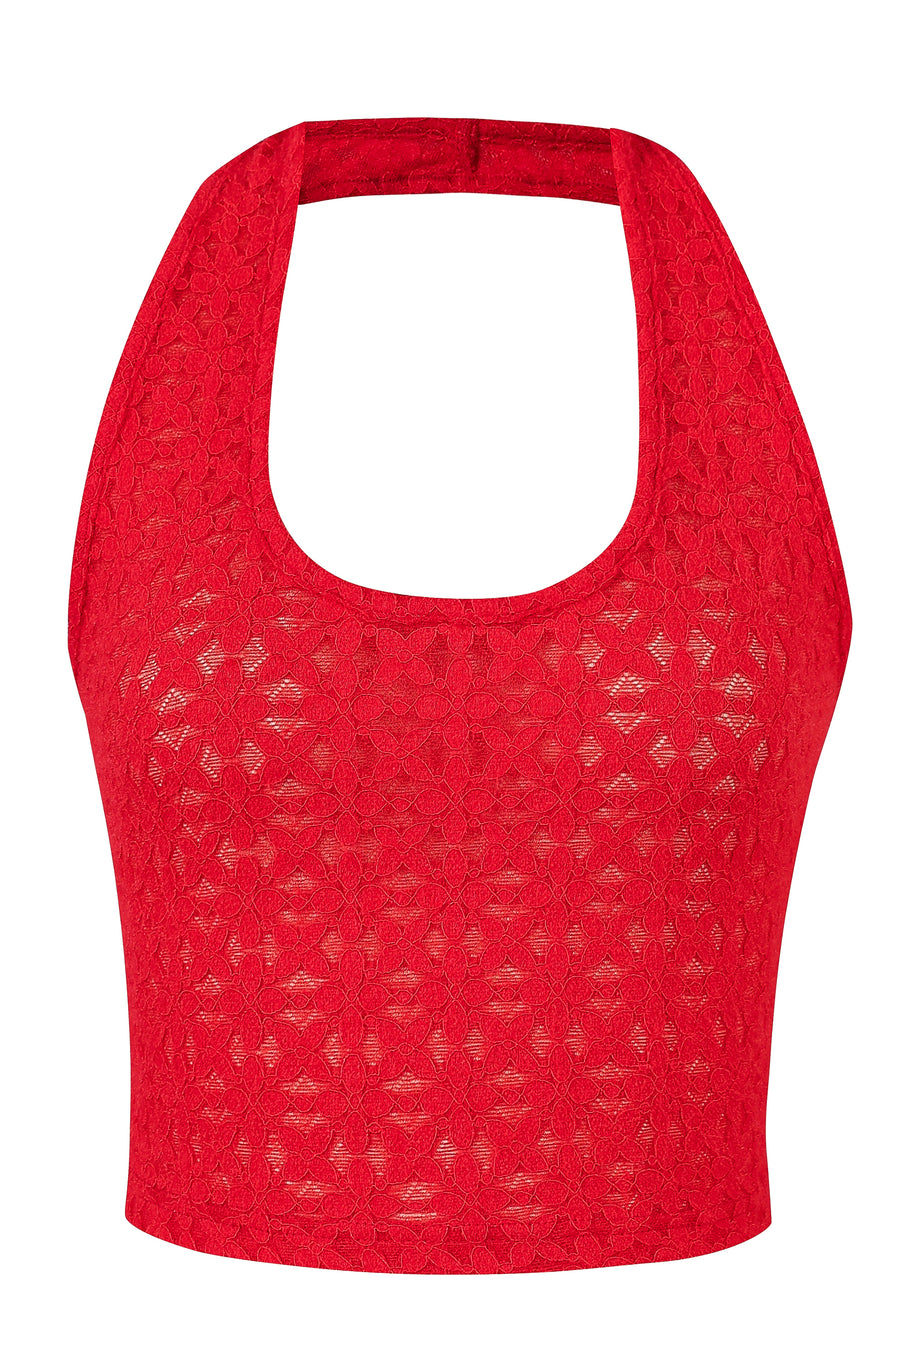 Red Lace Halter Top